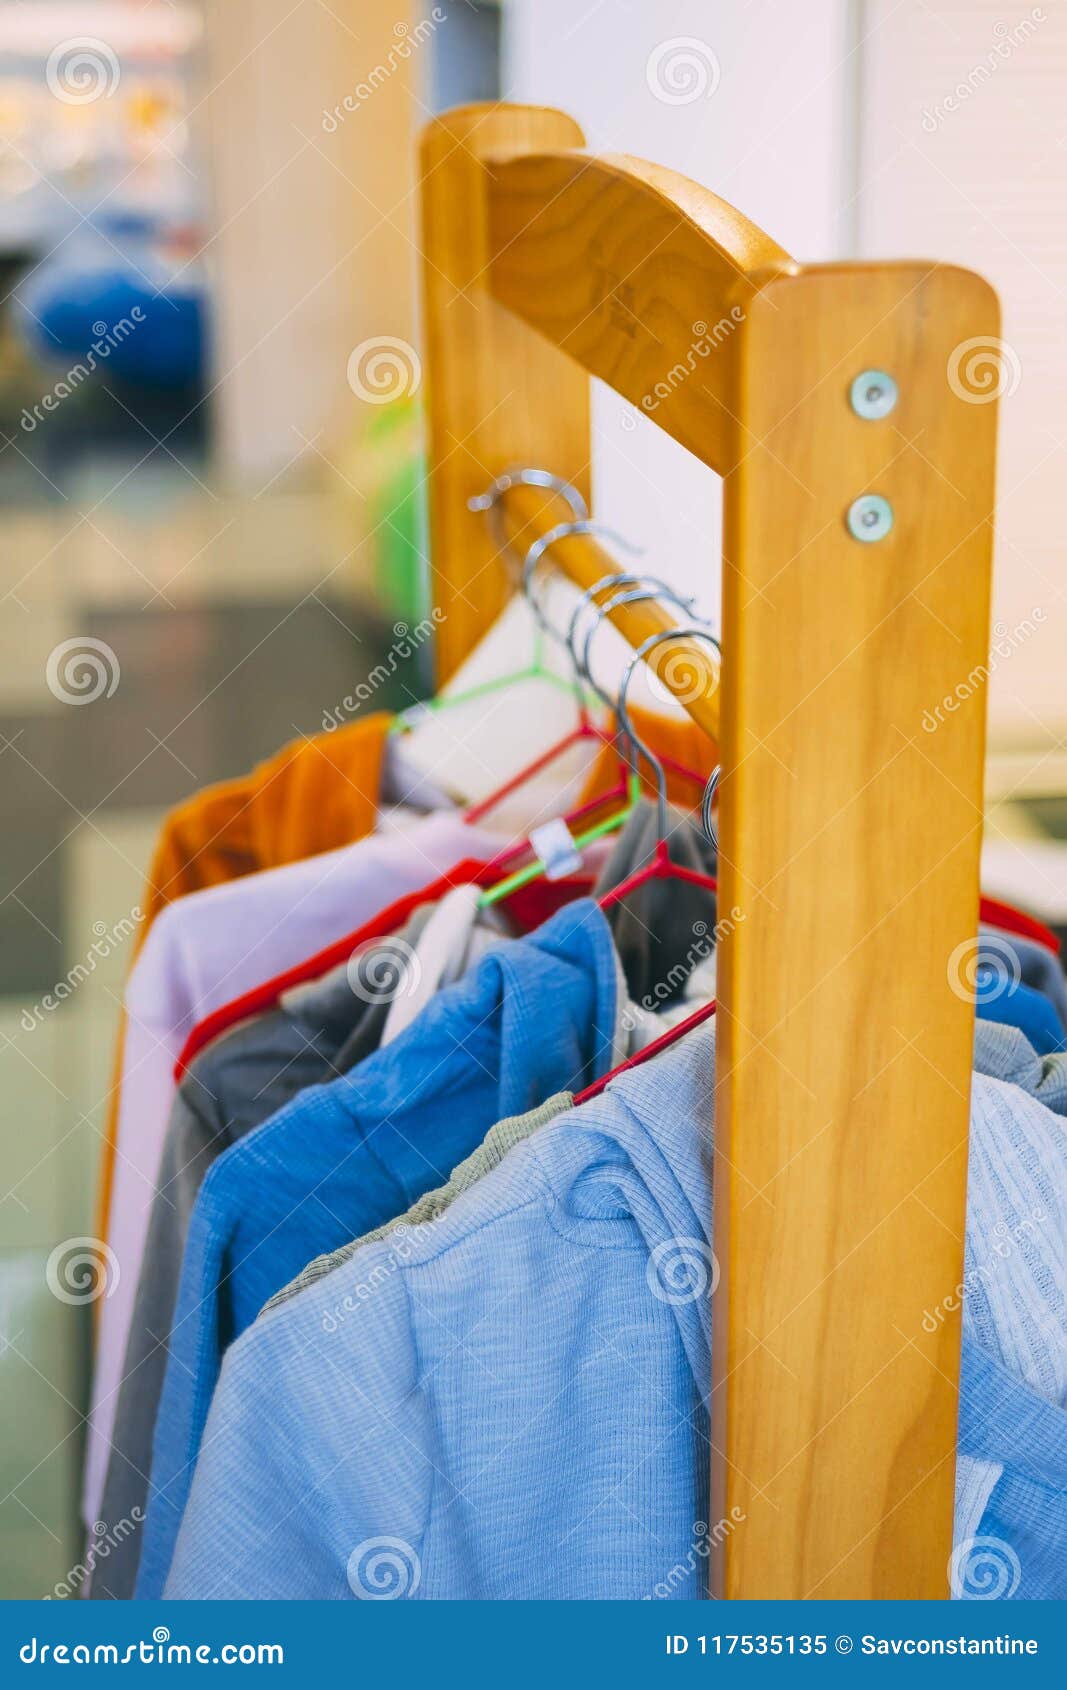 Clothes on hangers stock image. Image of lifestyle, equipment - 117535135